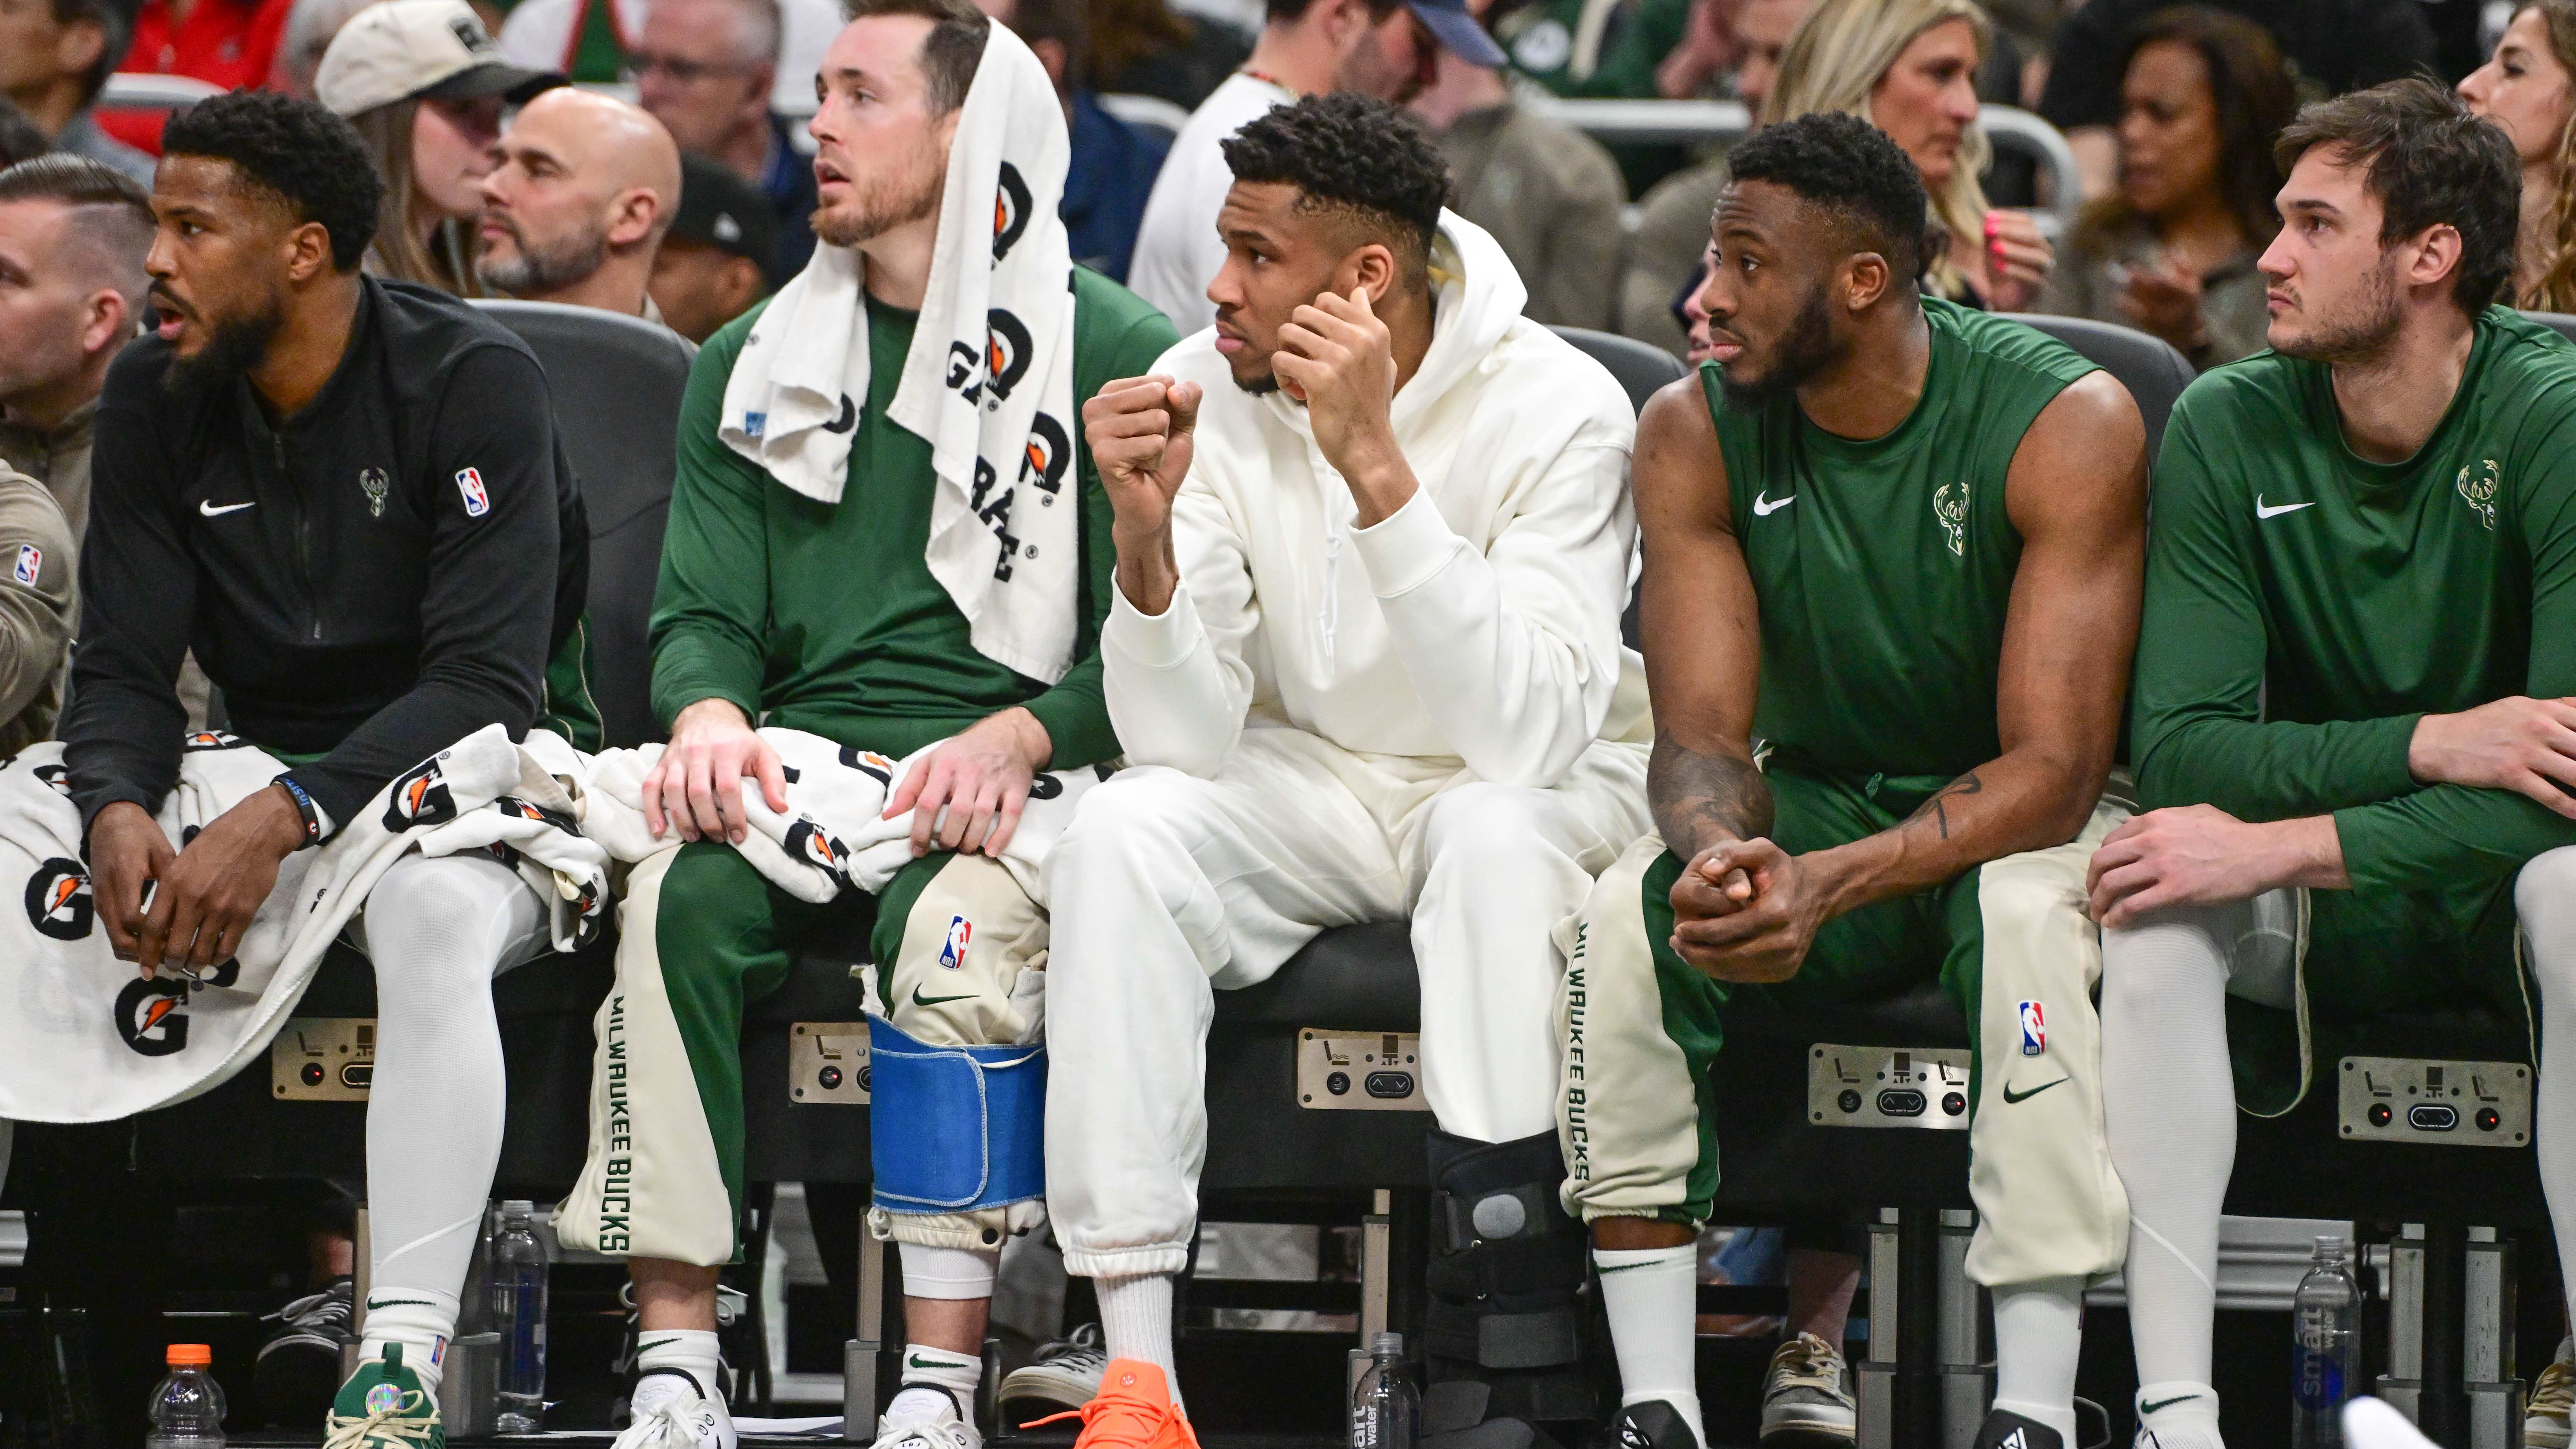 Bucks star Giannis Antetokounmpo still recovering from calf injury with Game 3 vs Indiana Pacers approaching